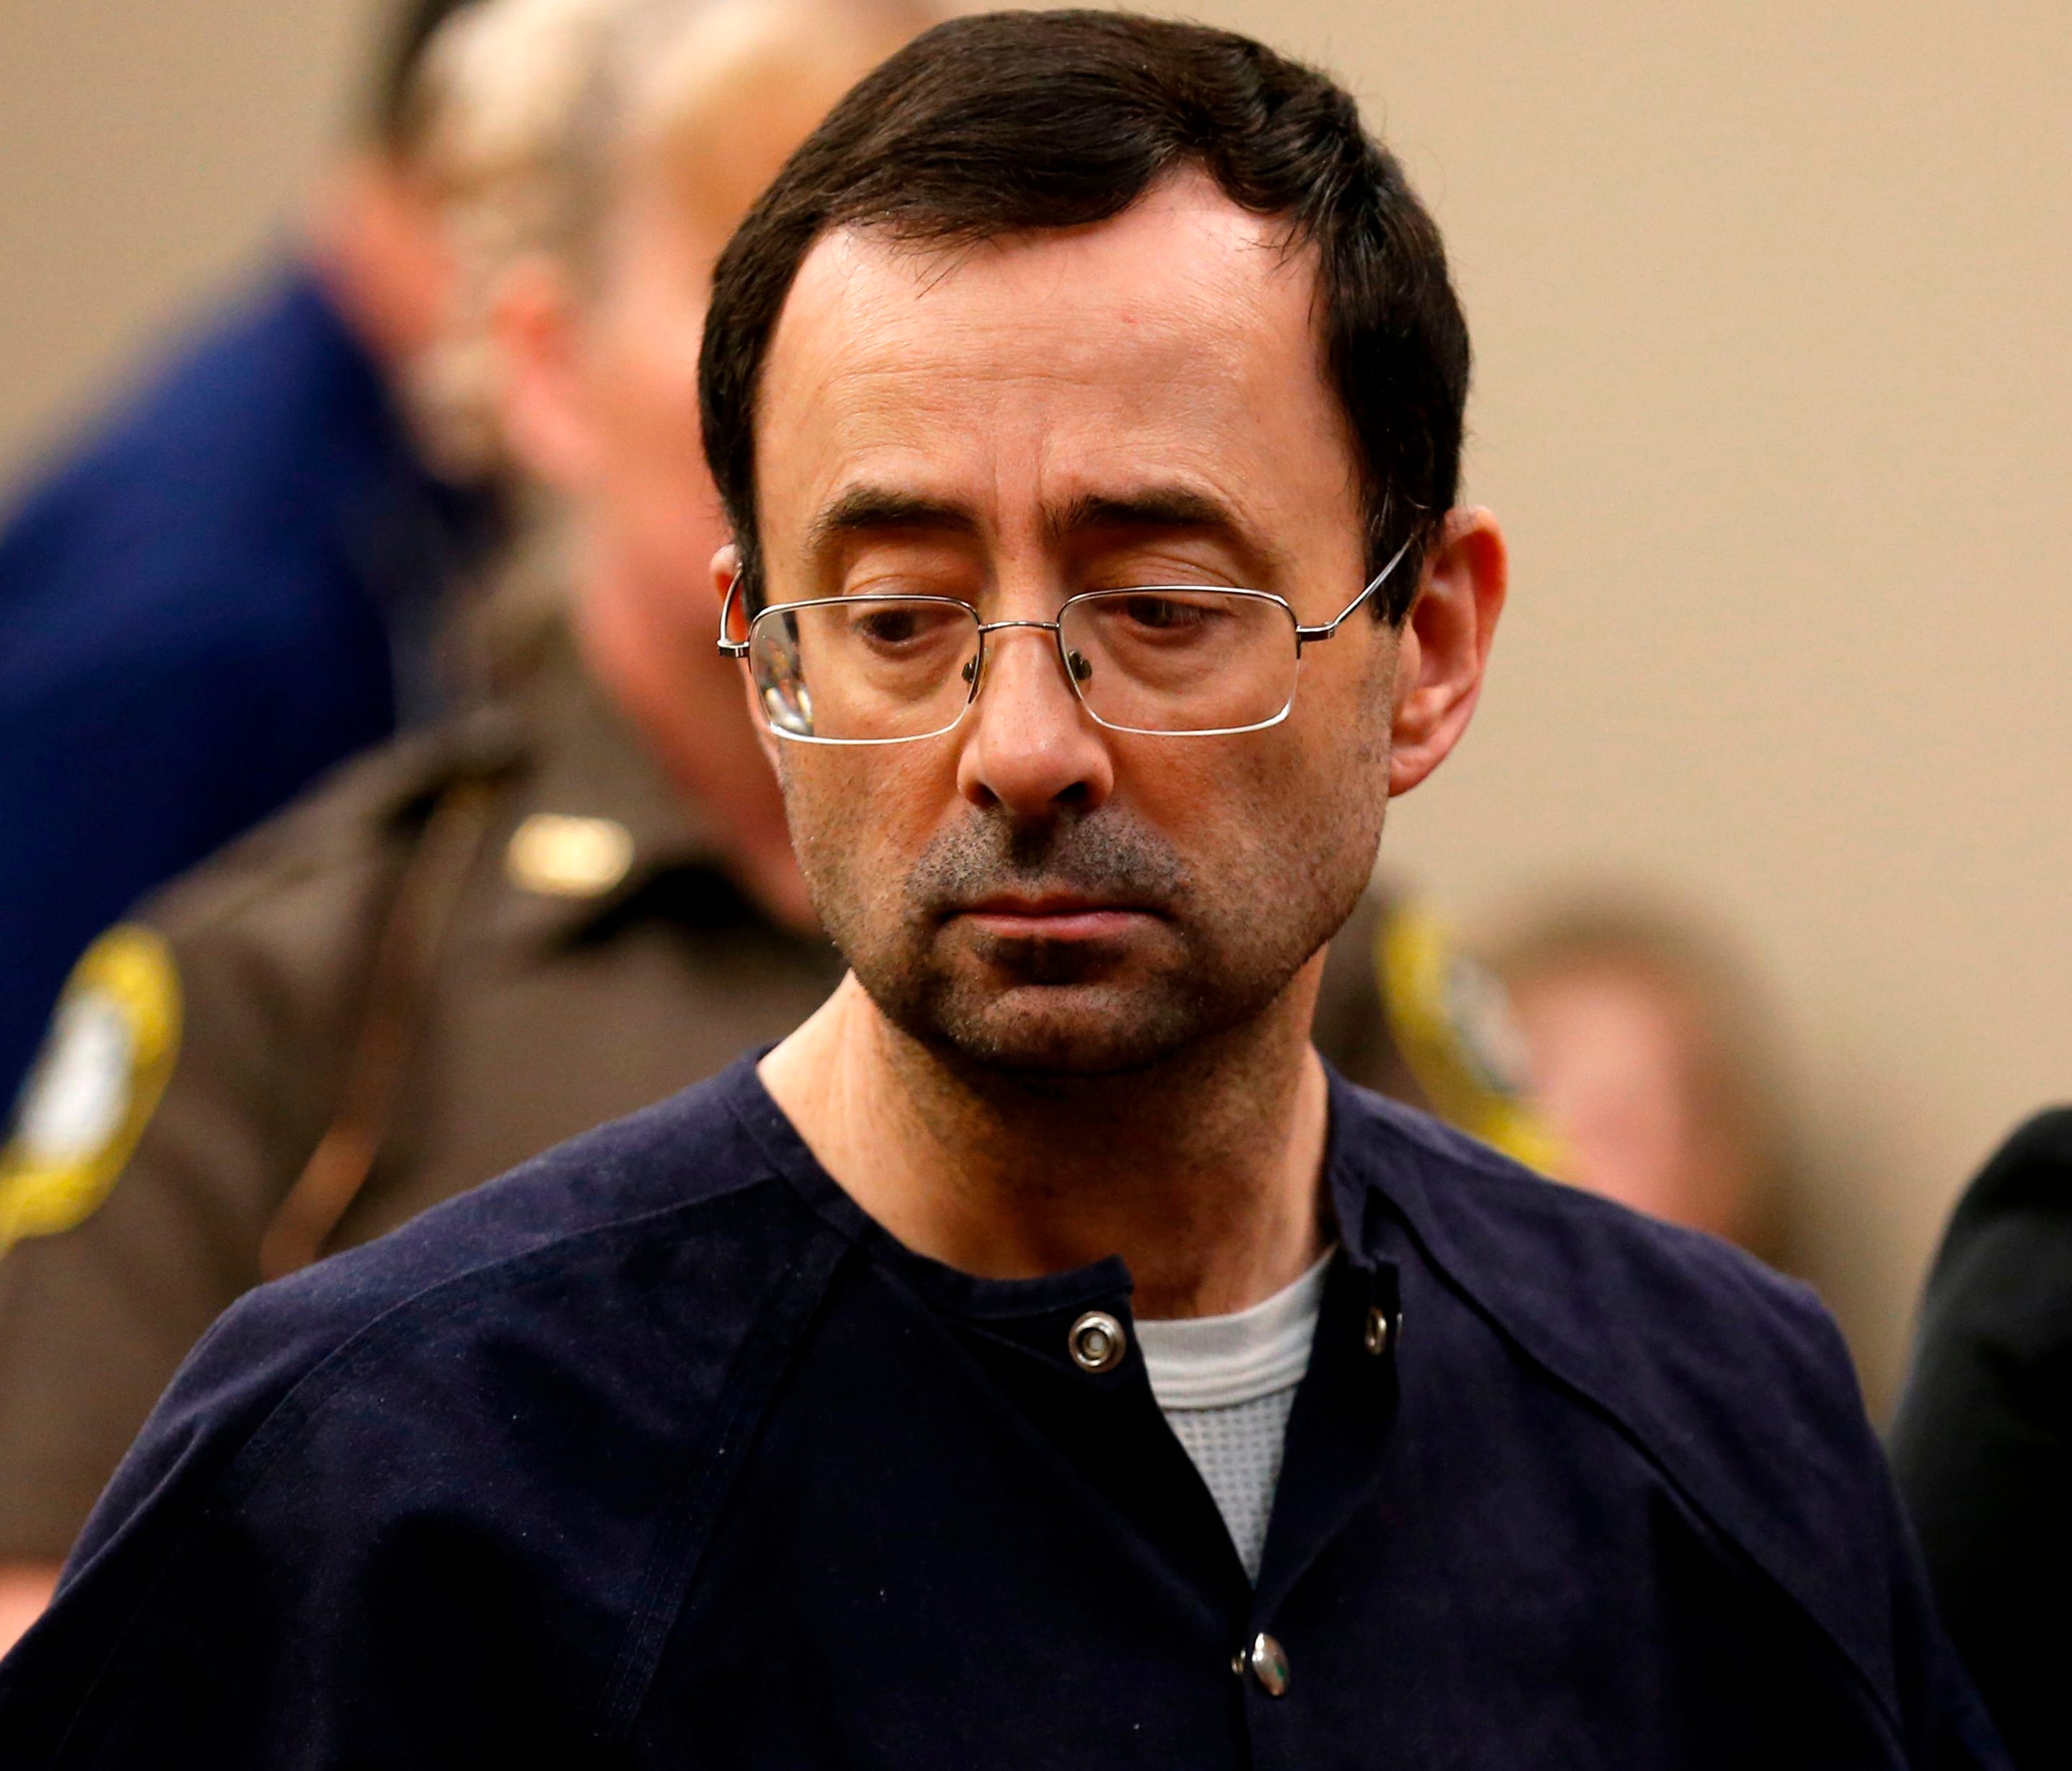 Former  Michigan State University and USA Gymnastics doctor Larry Nassar is pictured addressing the court during the sentencing phase in Ingham County Circuit Court in Lansing, Mich.